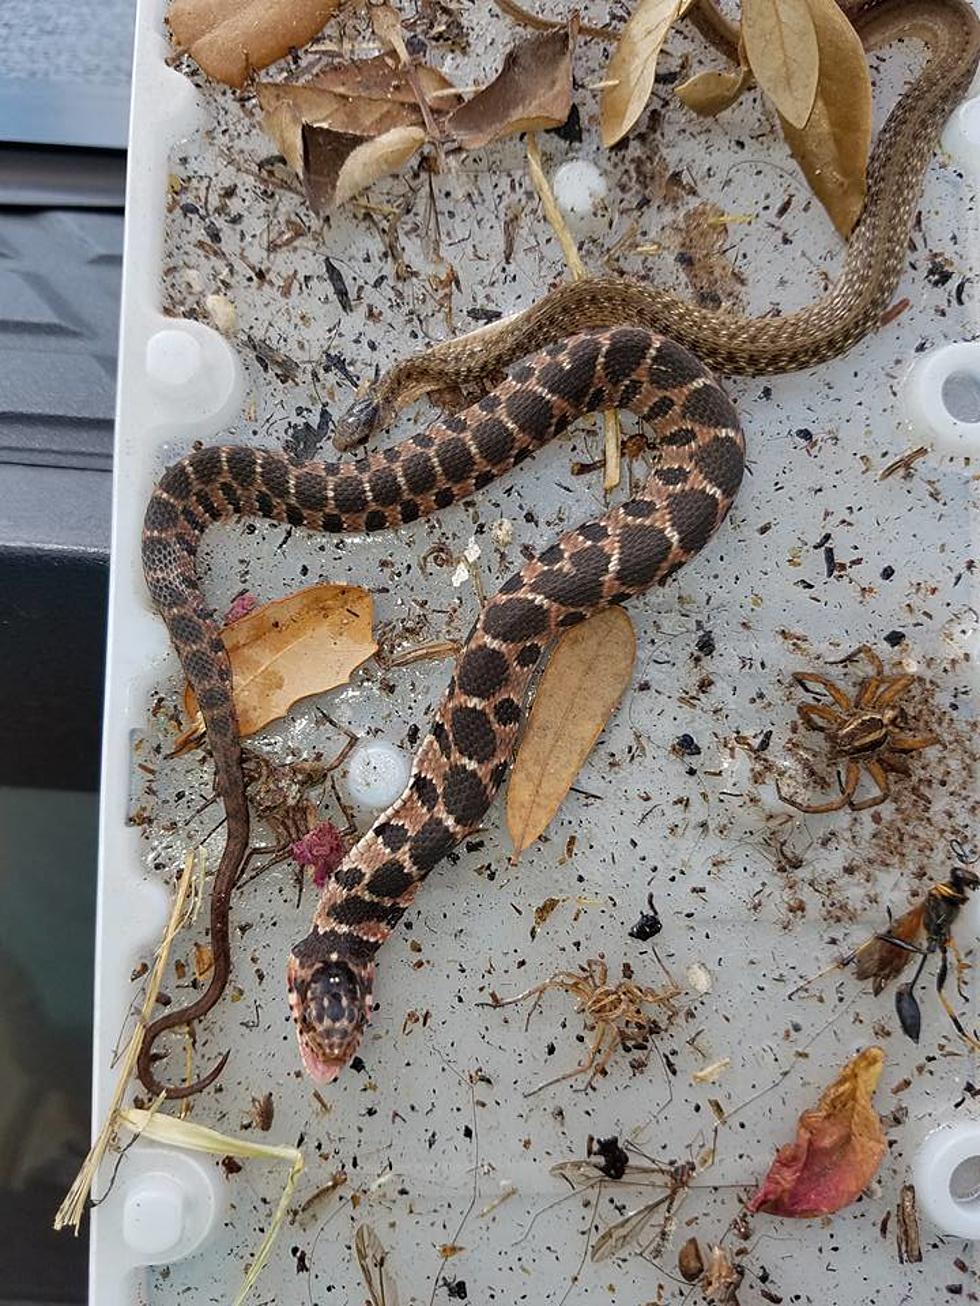 What This Guy Found On A Glue Trap In His Garage Will Make Your Skin Crawl [PHOTO]